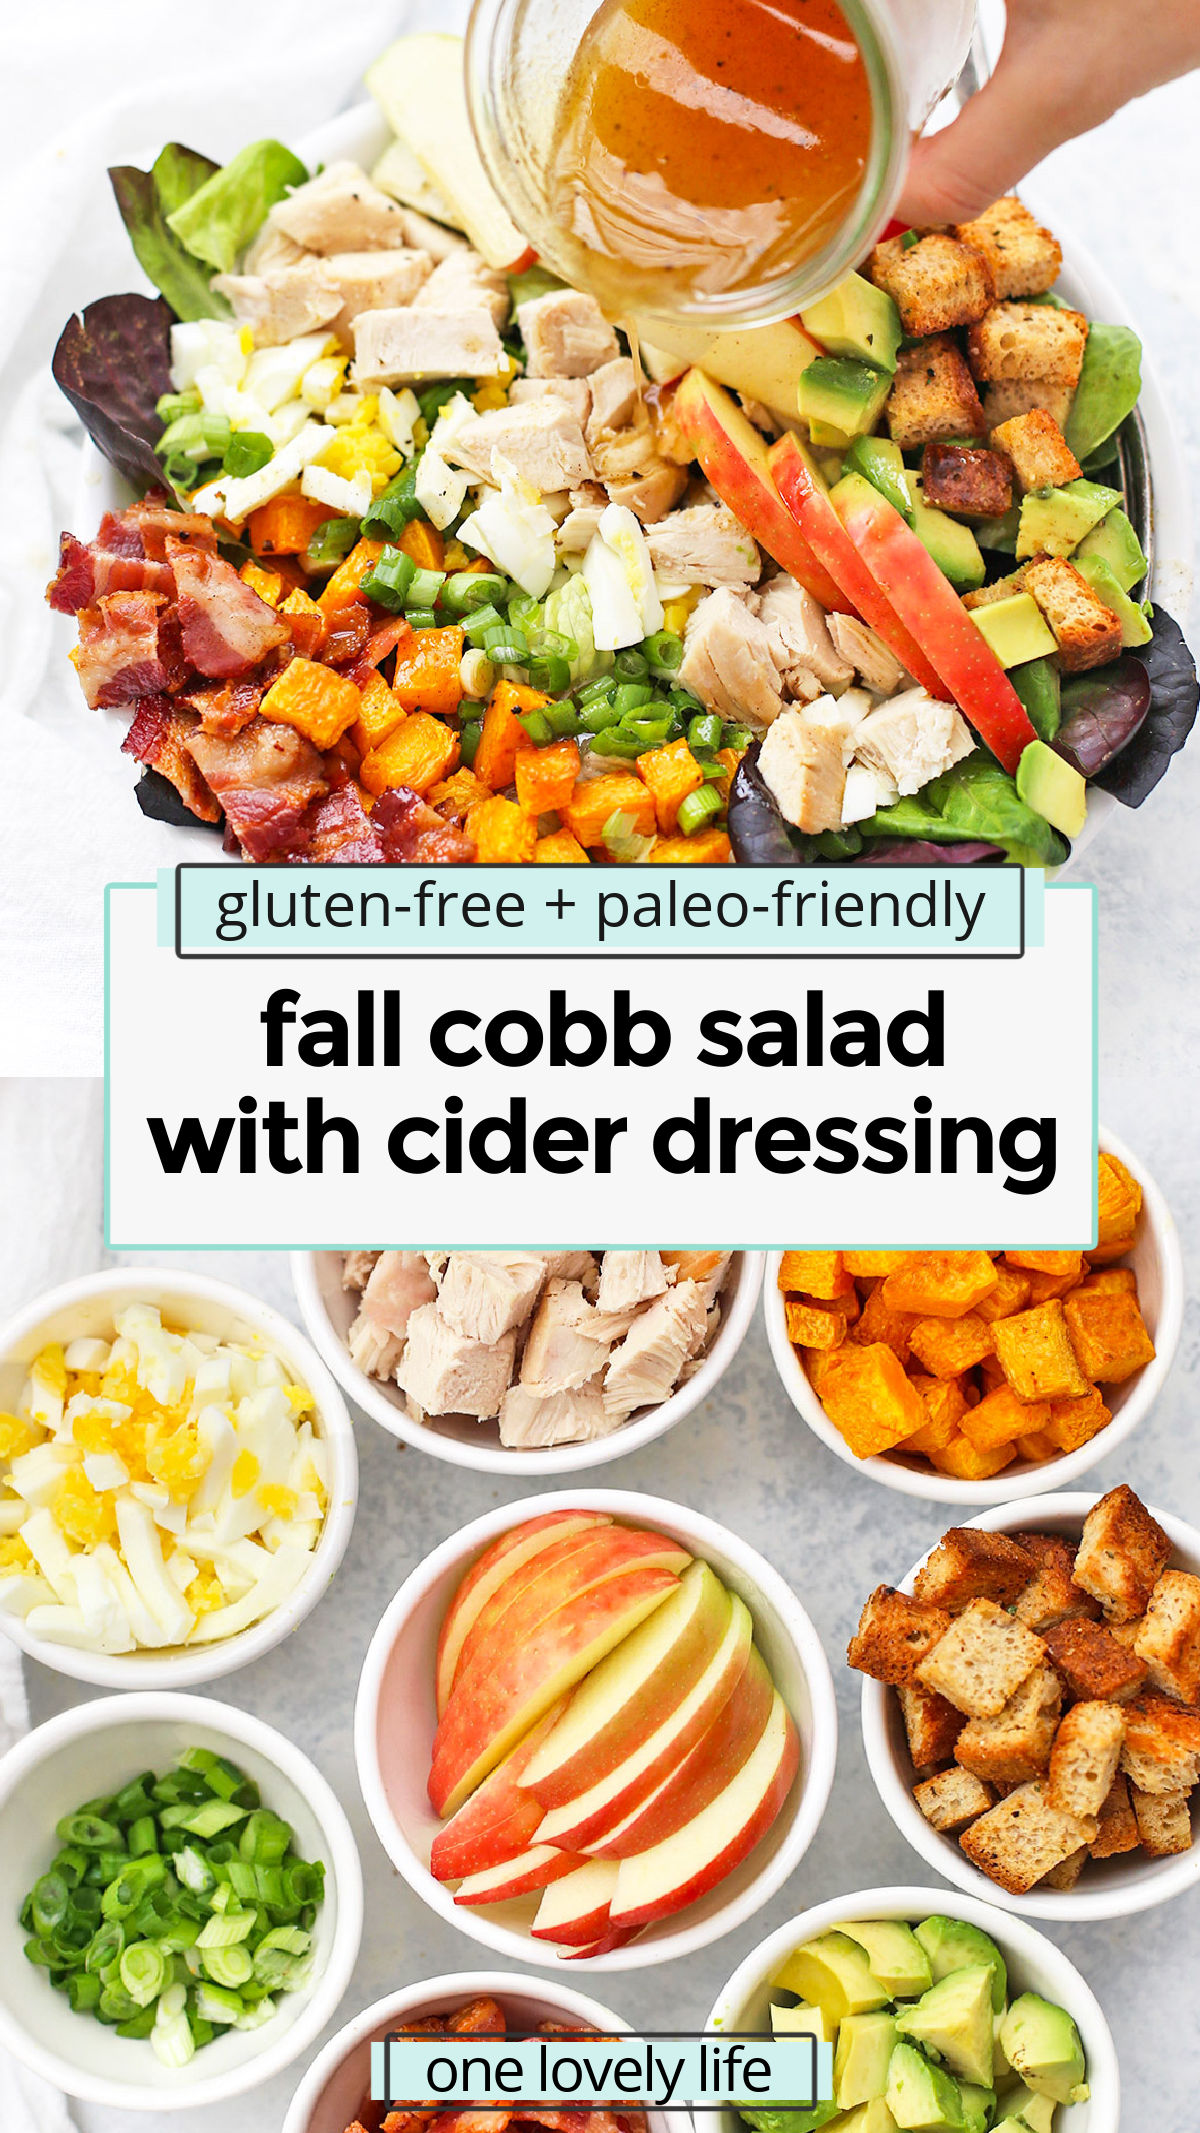 Fall Cobb Salad with Rosemary Croutons and Cider Vinaigrette - This delicious autumn take on a classic Cobb is the perfect fall or winter salad! / Fall Salad Recipe / Leftover Thanksgiving Recipe / Leftover Turkey Recipe / Leftover Chicken Recipe / Fall Cobb Salad recipe / Apple Cider Salad Dressing / Apple Salad Dressing / Gluten Free Dinner / Paleo Dinner / Healthy Dinner / Main Dish Salad / Autumn Cobb Salad / Harvest Cobb Salad /